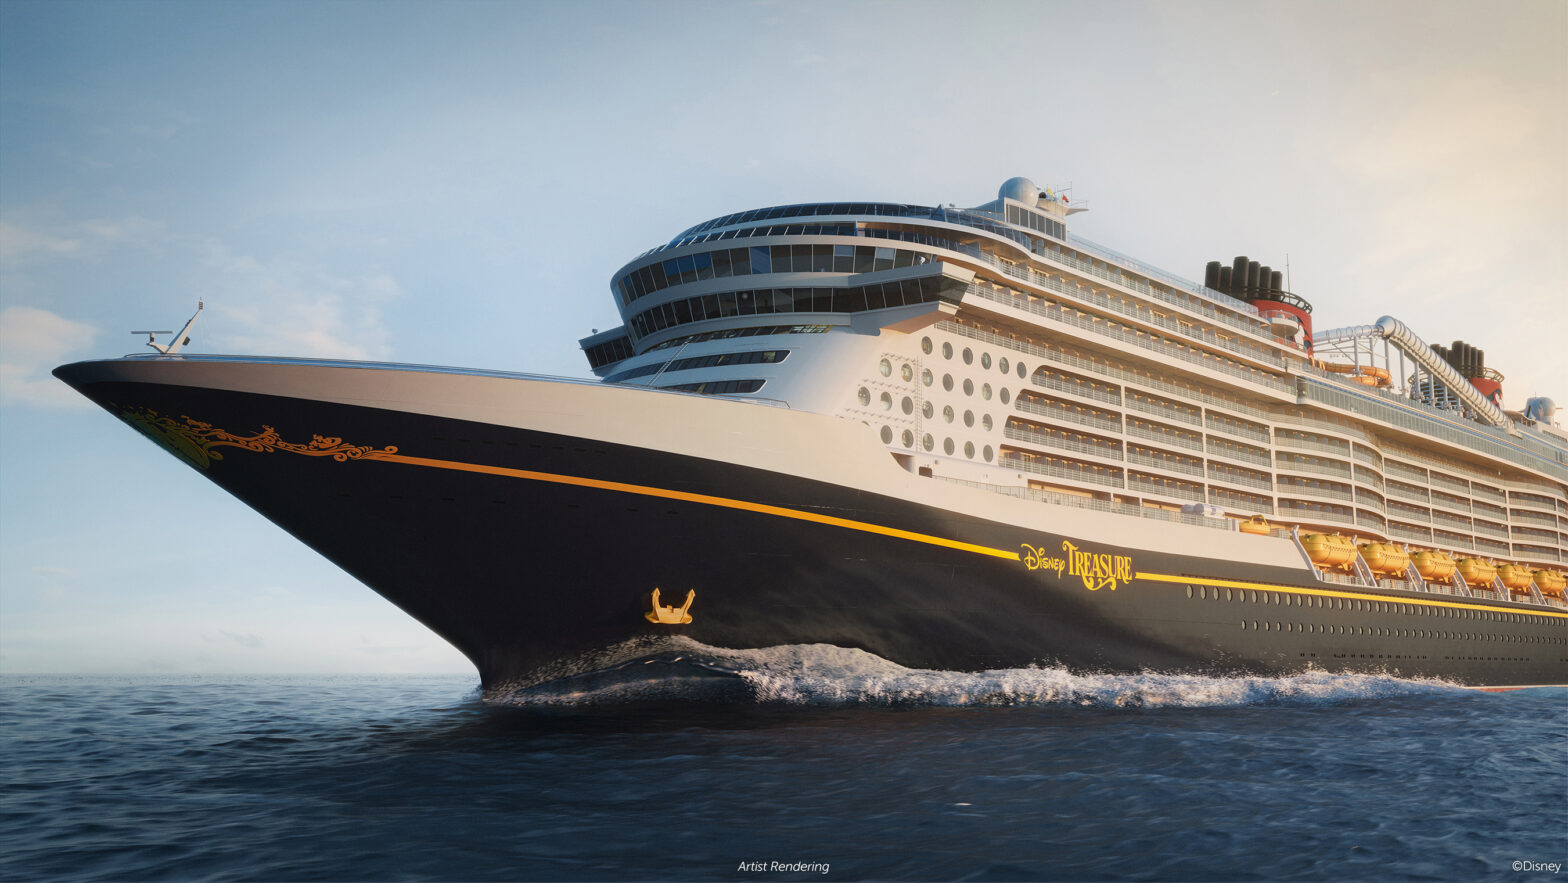 A Look Inside: Here's What Travelers Can Expect on Disney Treasure Cruise